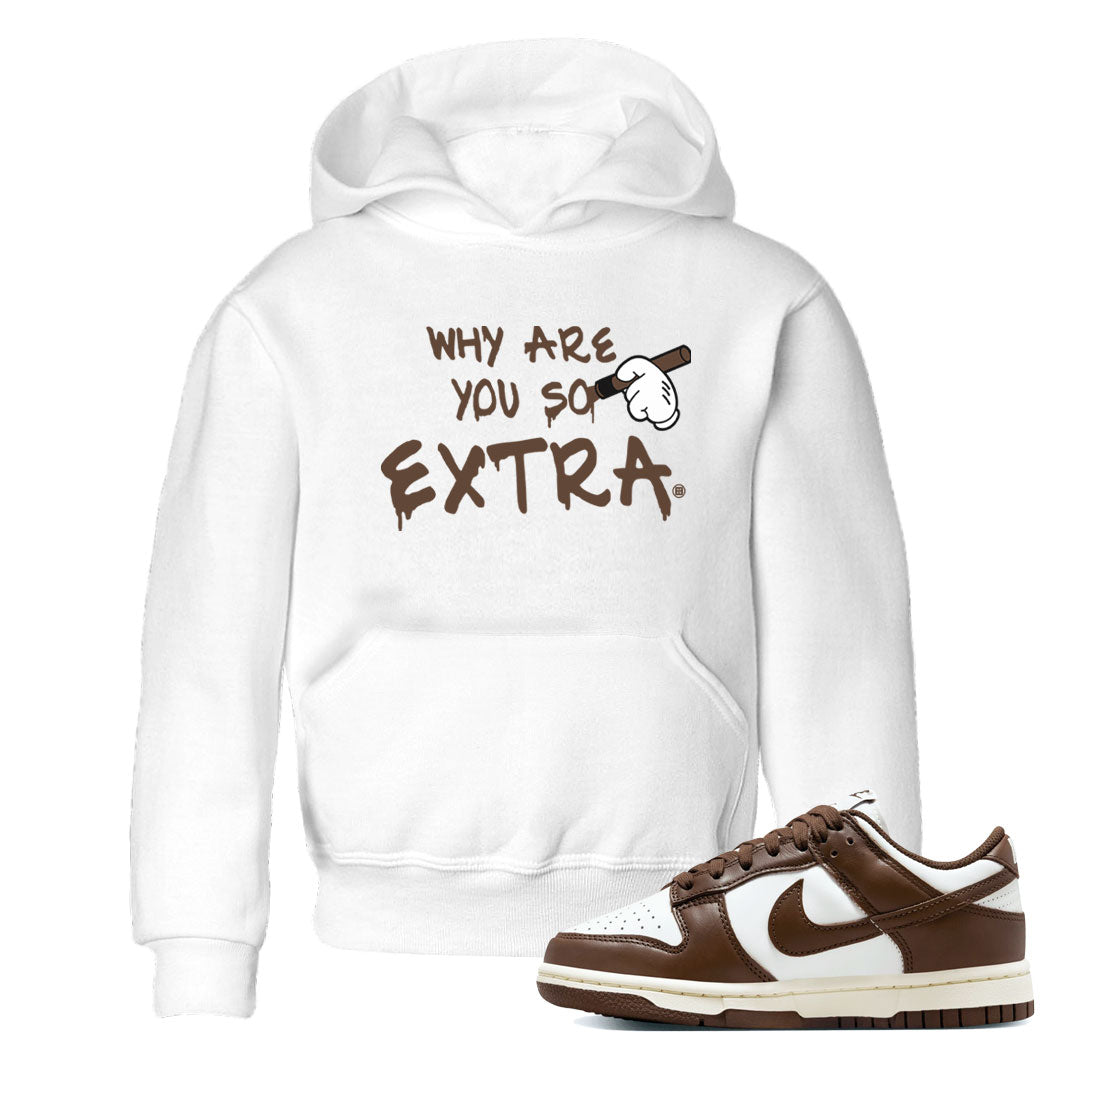 Dunk Low WMNS Cacao Wow sneaker shirt to match jordans Why Are You So Extra sneaker tees Dunk Cacao Wow SNRT Sneaker Release Tees Baby Toddler White 1 T-Shirt